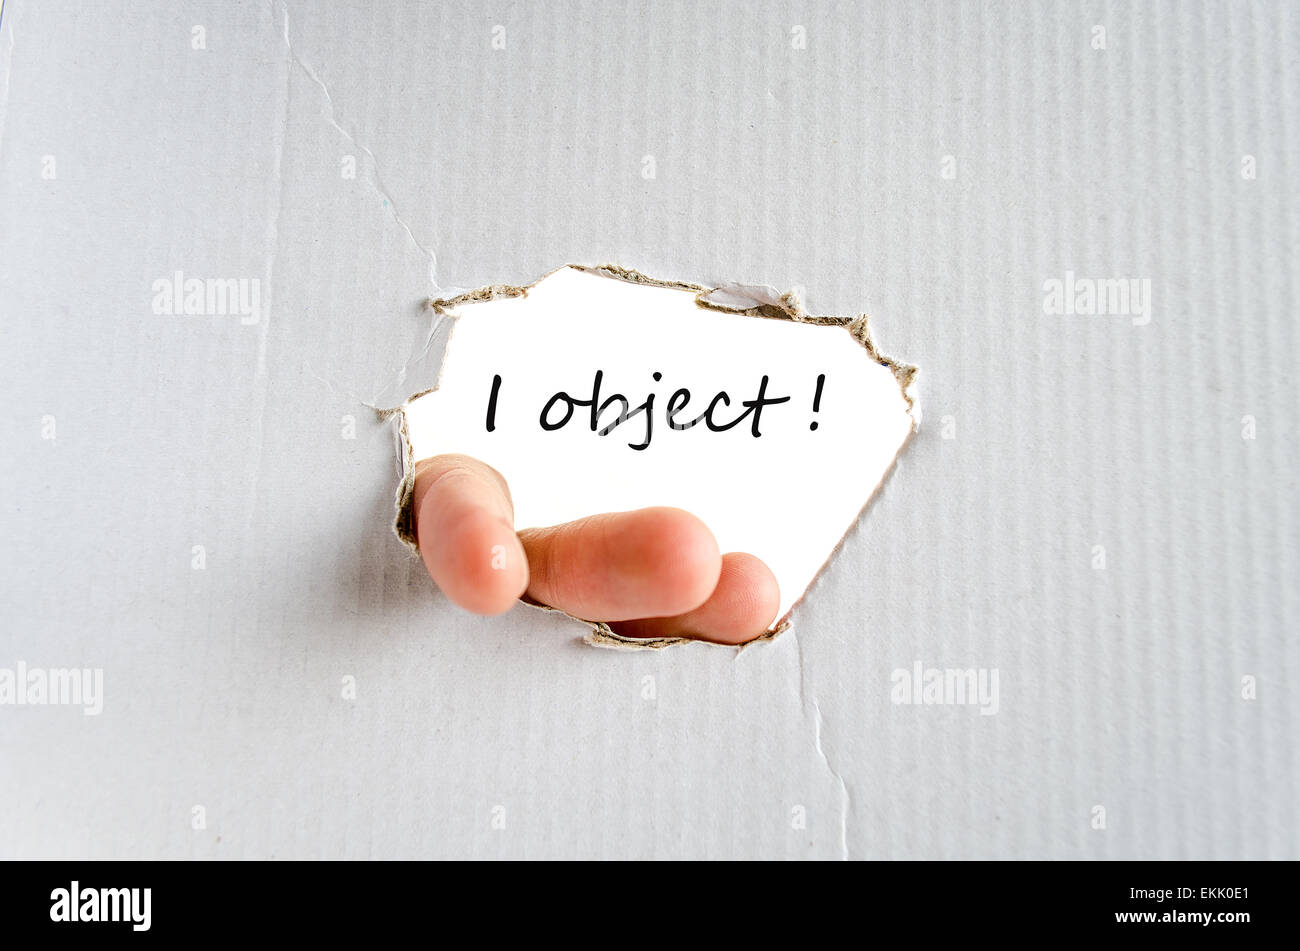 I Object Concept Over White Background Stock Photo